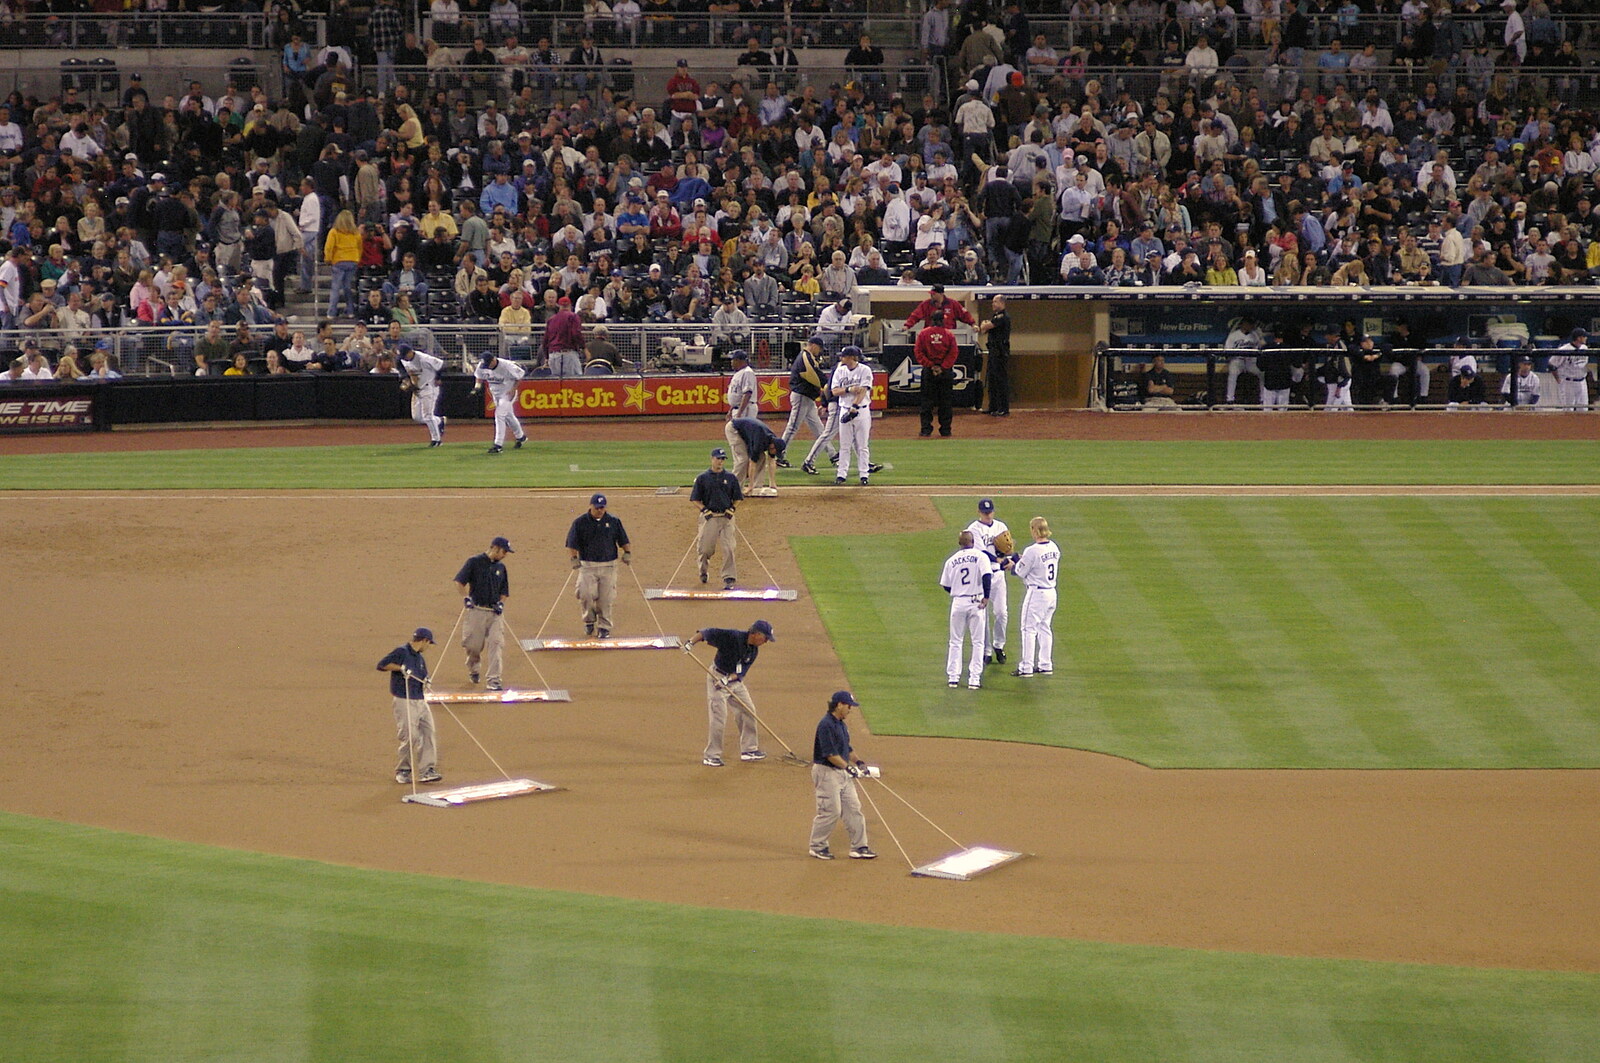 The track is raked during an innings break from The Padres at Petco Park: a Baseball Game, San Diego, California - 31st May 2005